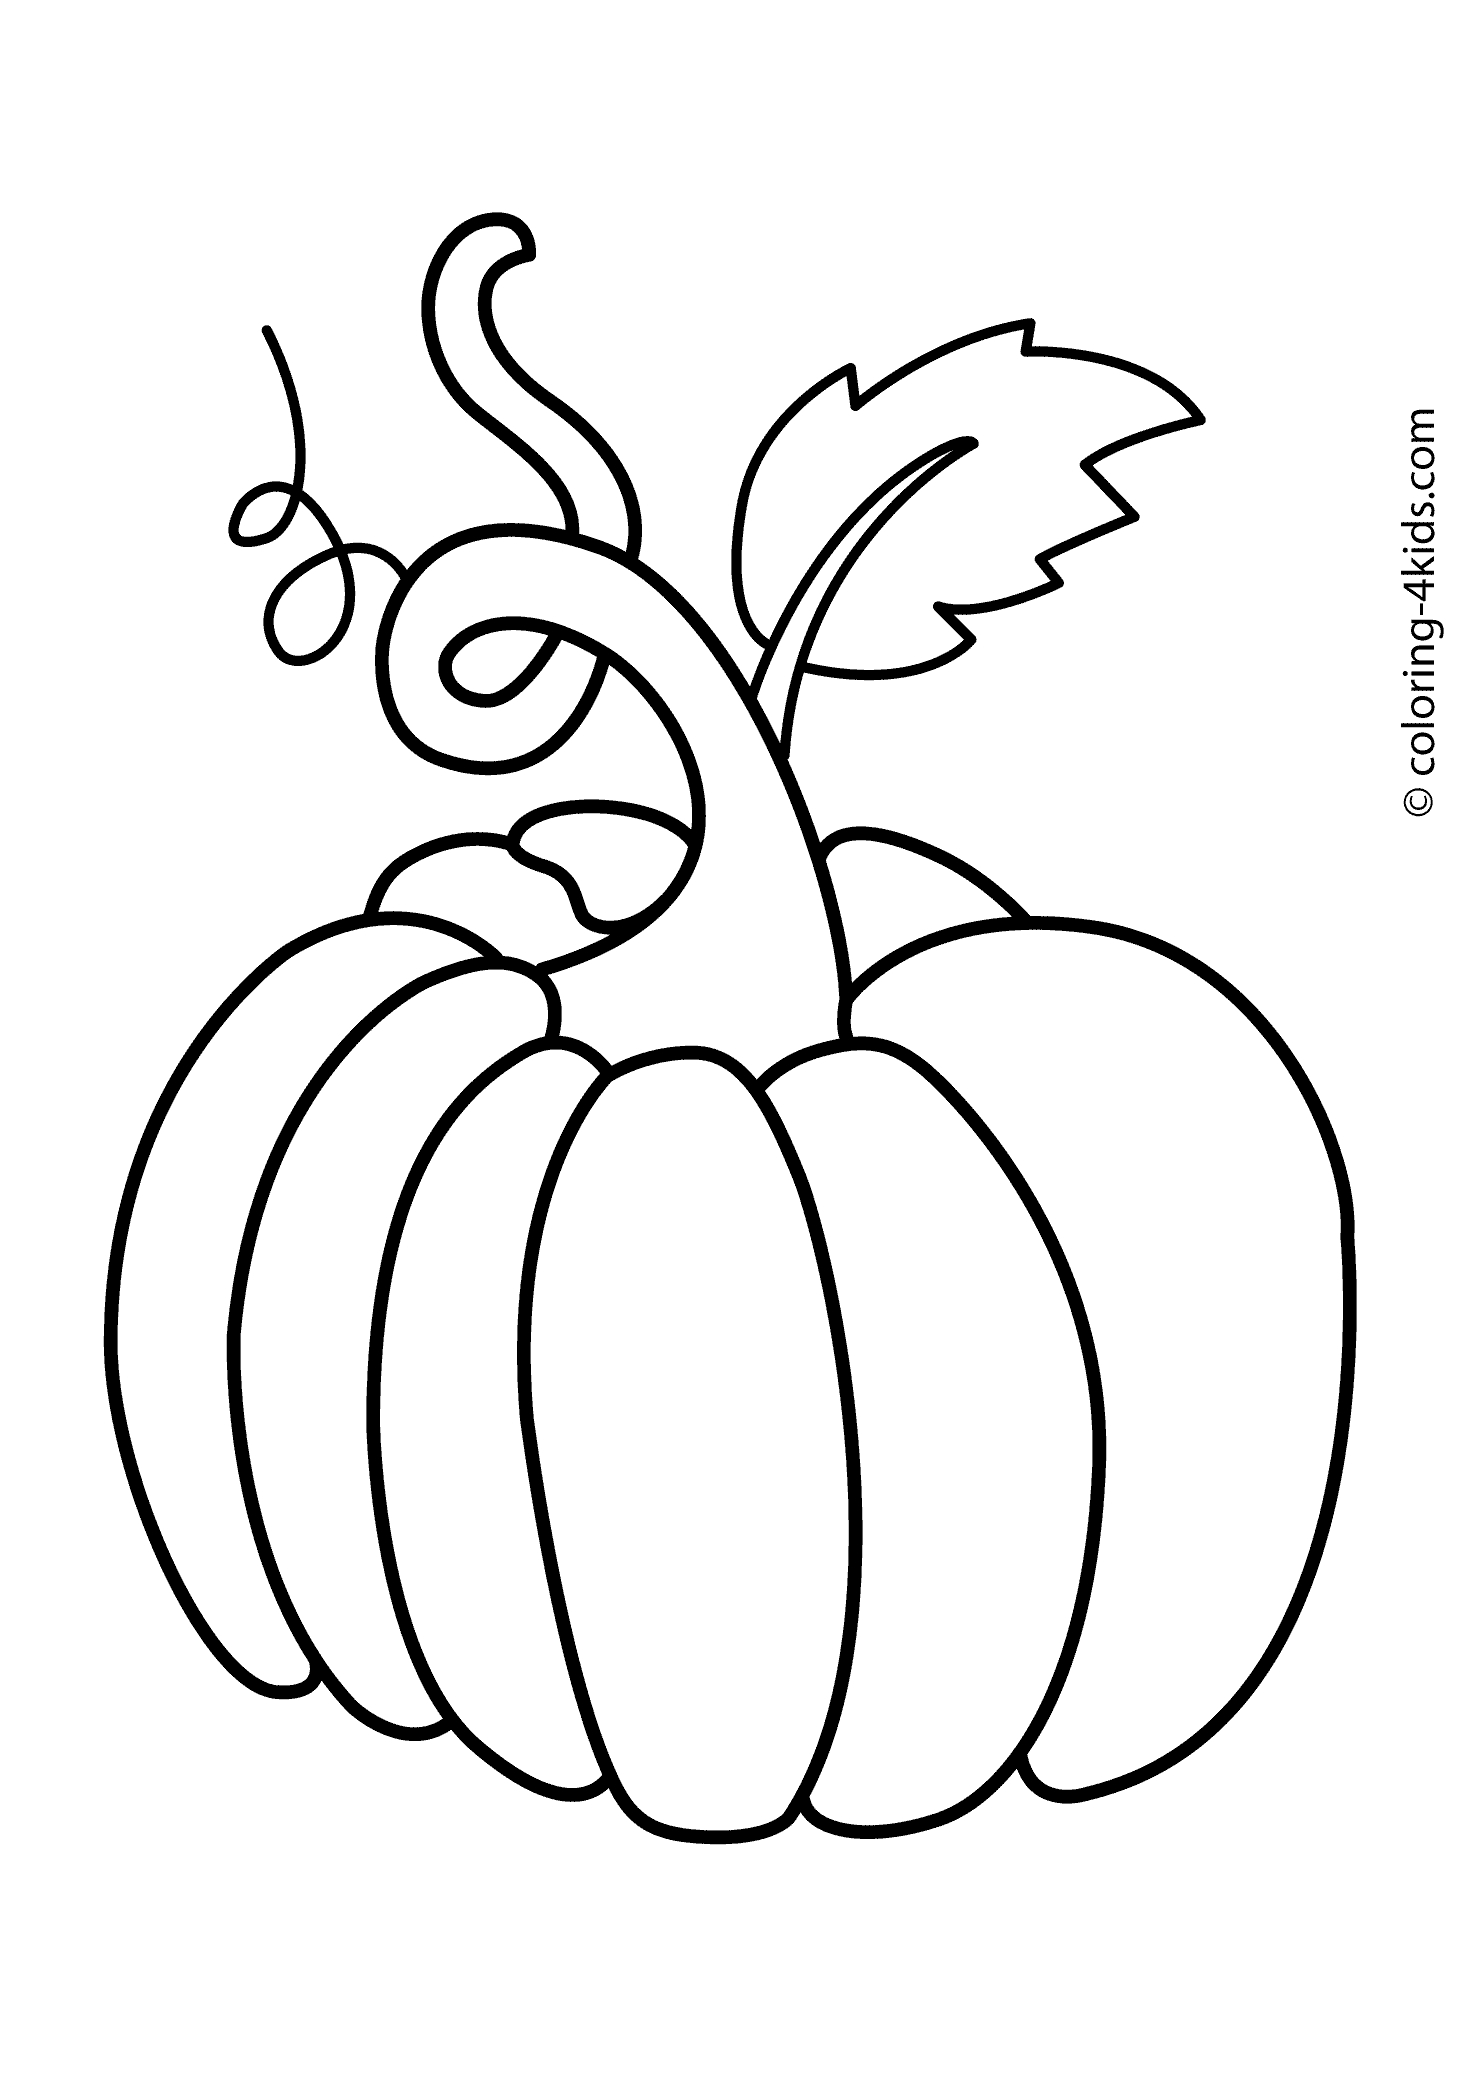 Turnip Coloring Page Vegetable Coloring Pages Free Download Best Vegetable Coloring